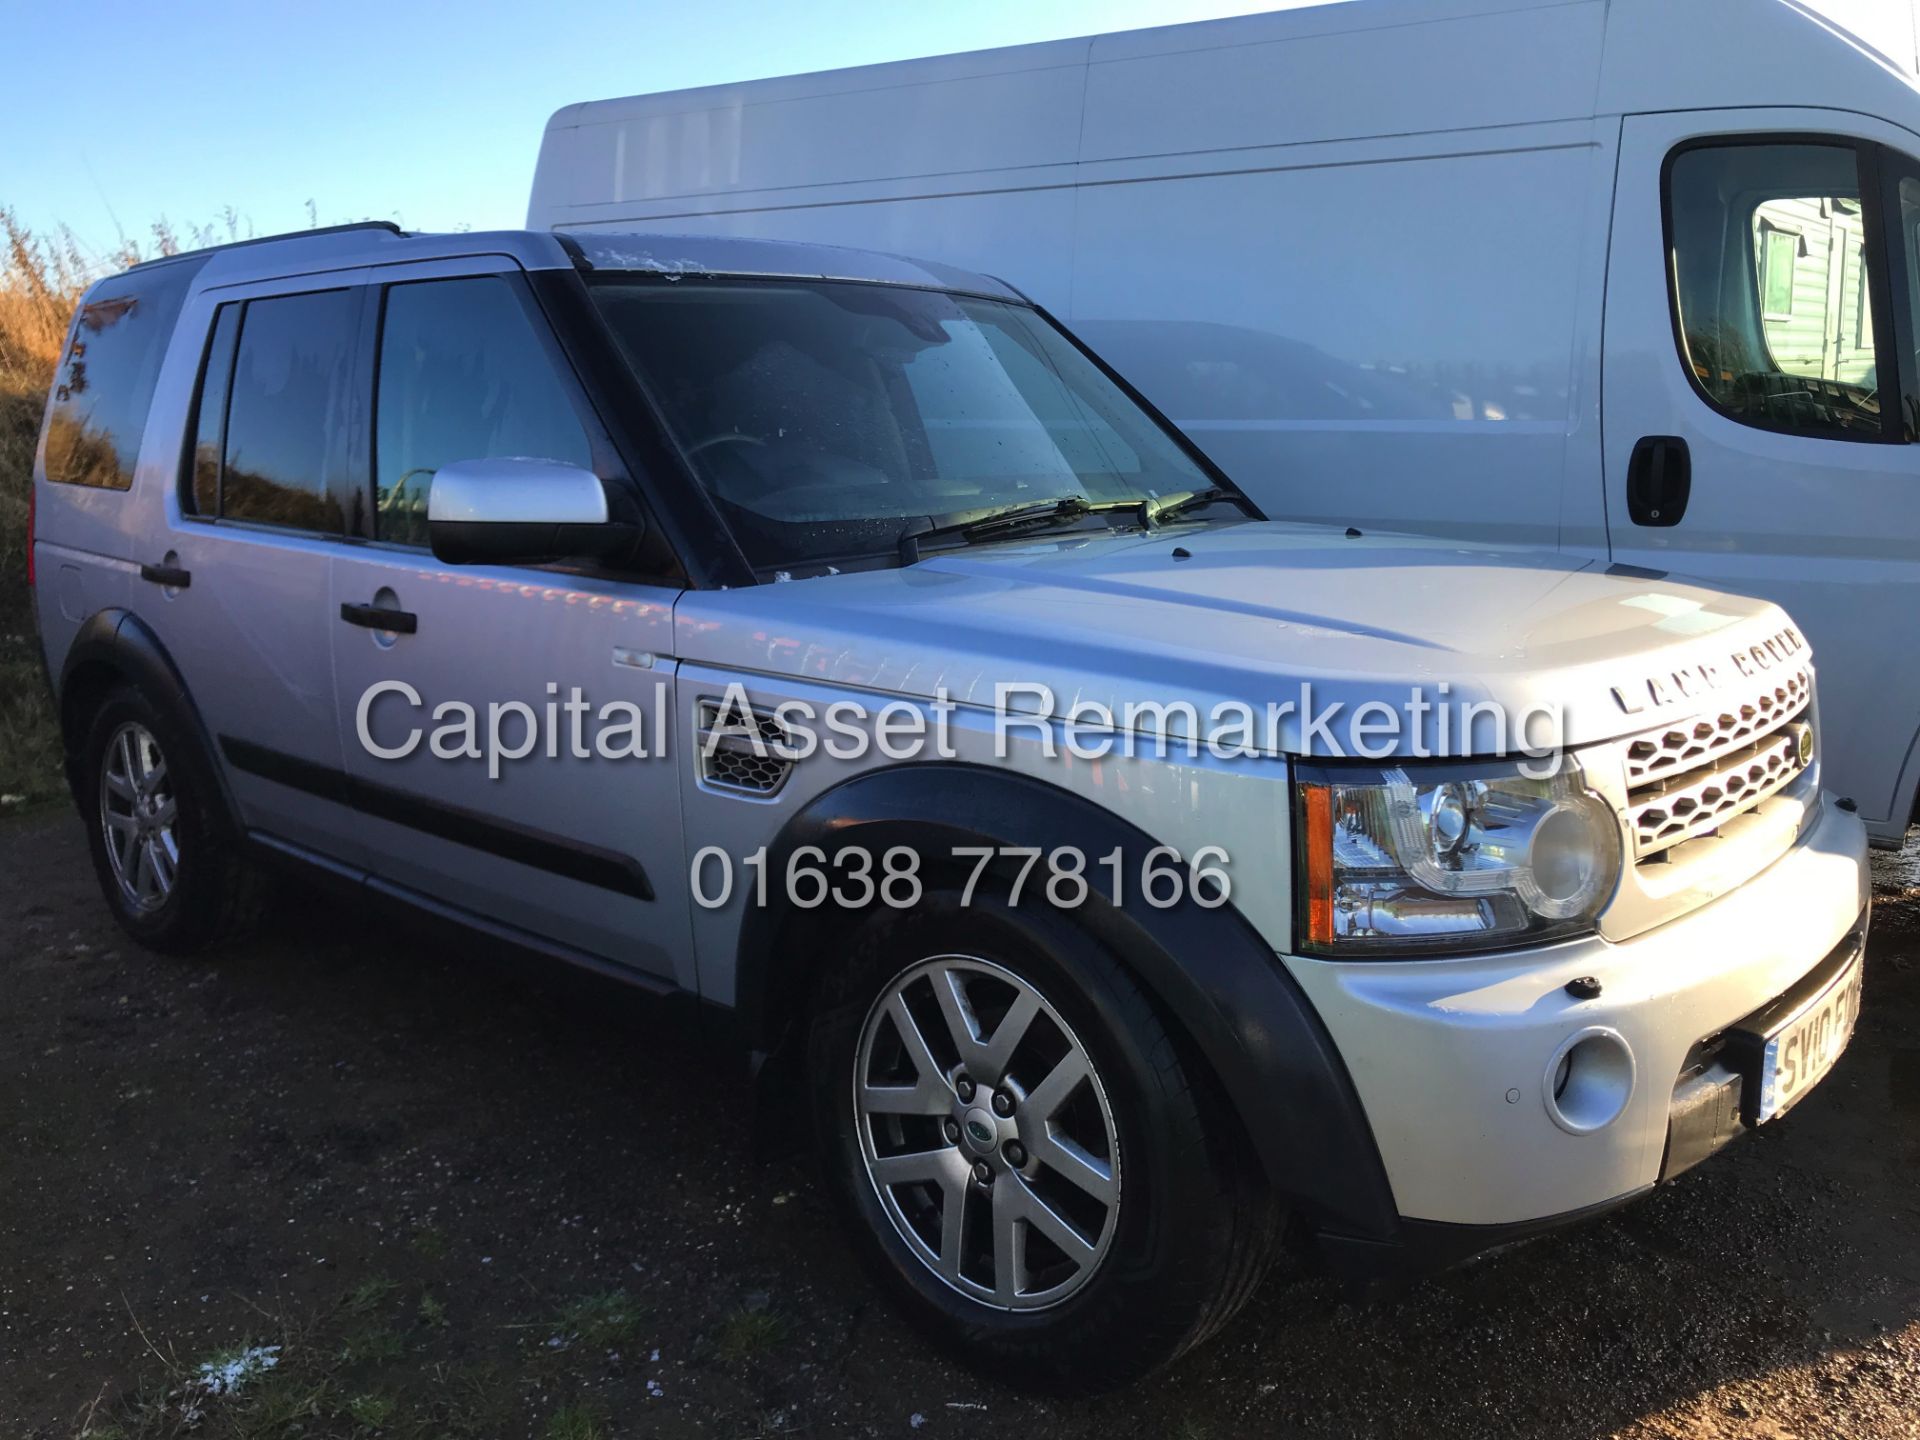 On Sale LAND ROVER DISCOVERY 4 2.7TDV6 AUTO "COMMERCIAL" MASSIVE SPEC (10 REG) SAT NAV - LEATHER